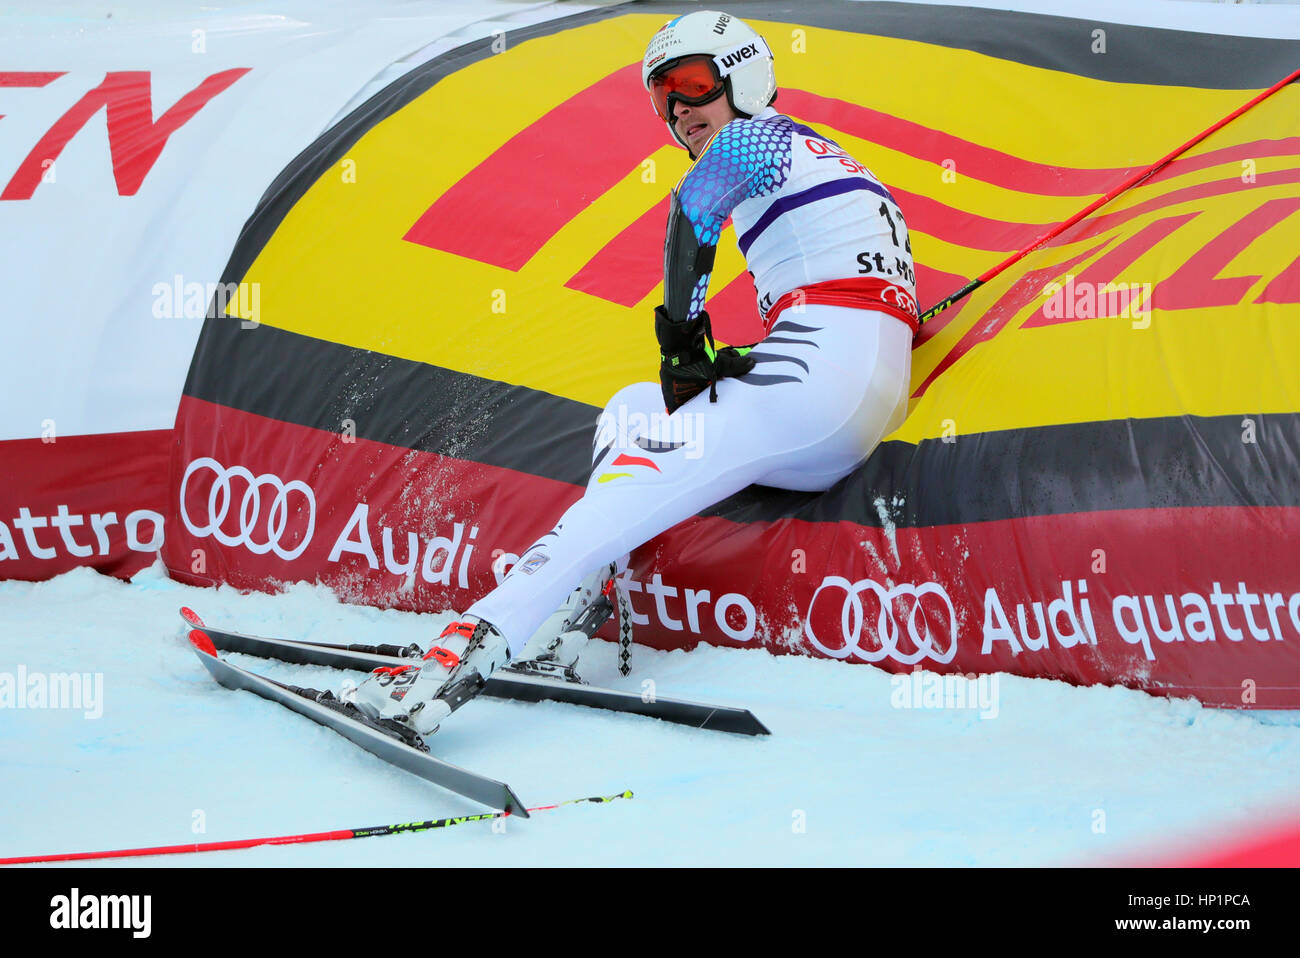 St Moritz, Switzerland. 17th February, 2017. German skier Felix Neureuther crosses the finishing line after competing in the men's giant slalom event at the Alpine World Ski Championships Credit: Action Plus Sports Images/Alamy Live News Stock Photo